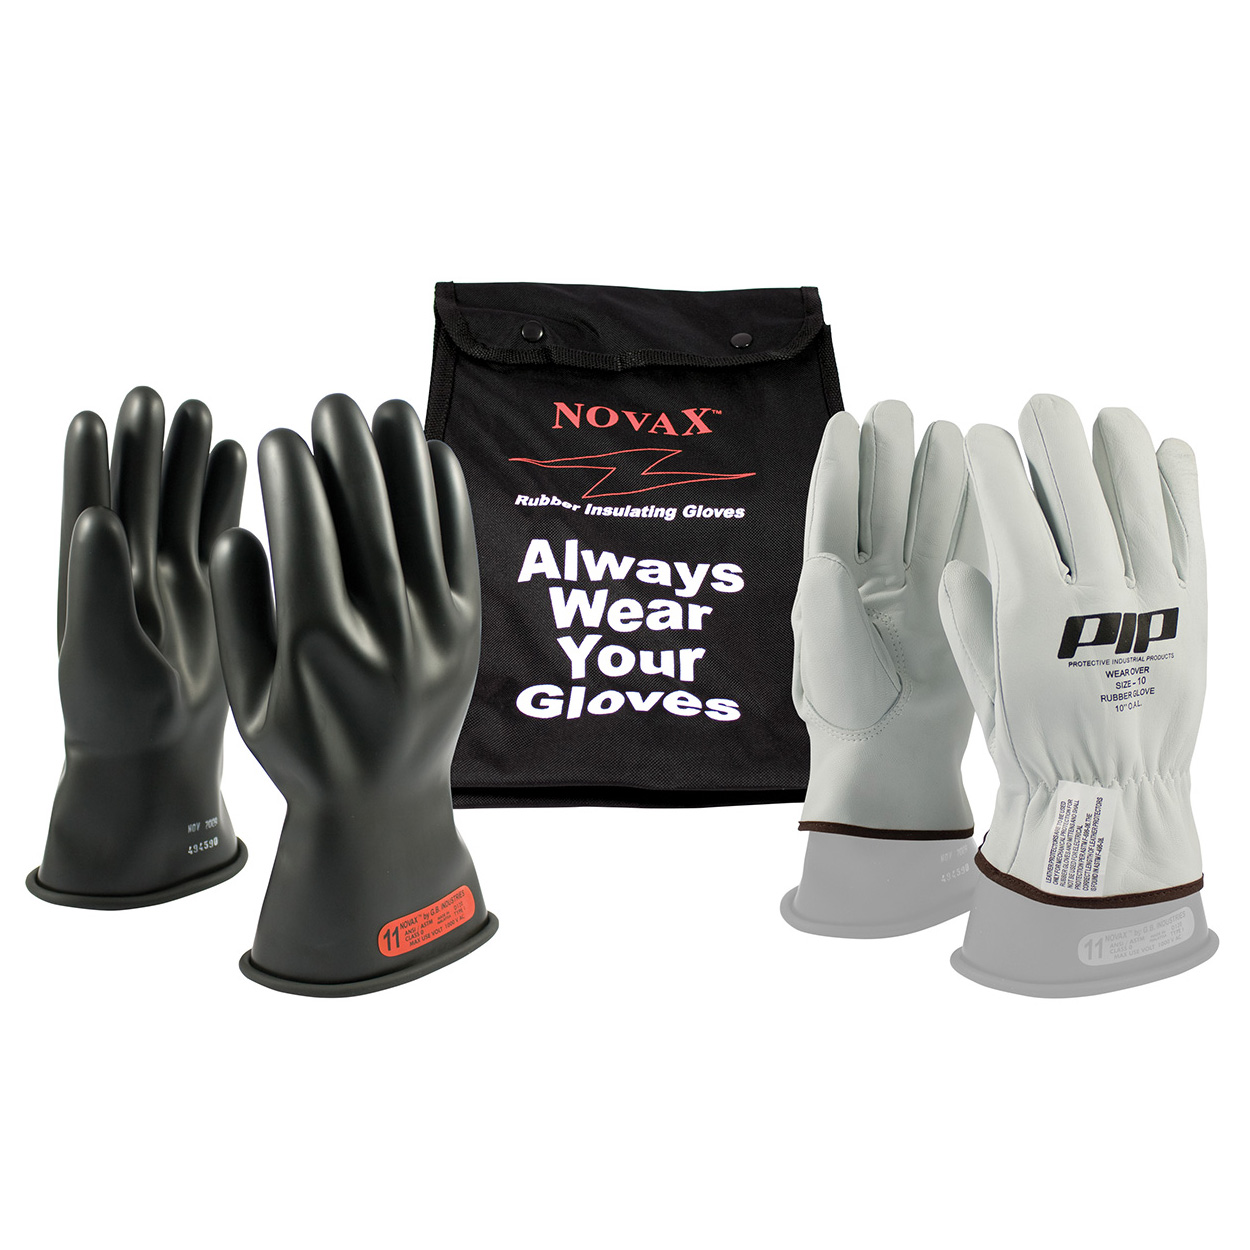 PIP 150-0-14/11 Novax Class 0 Rubber Insulating Gloves with Straight Cuff - 14, Black, Size 11